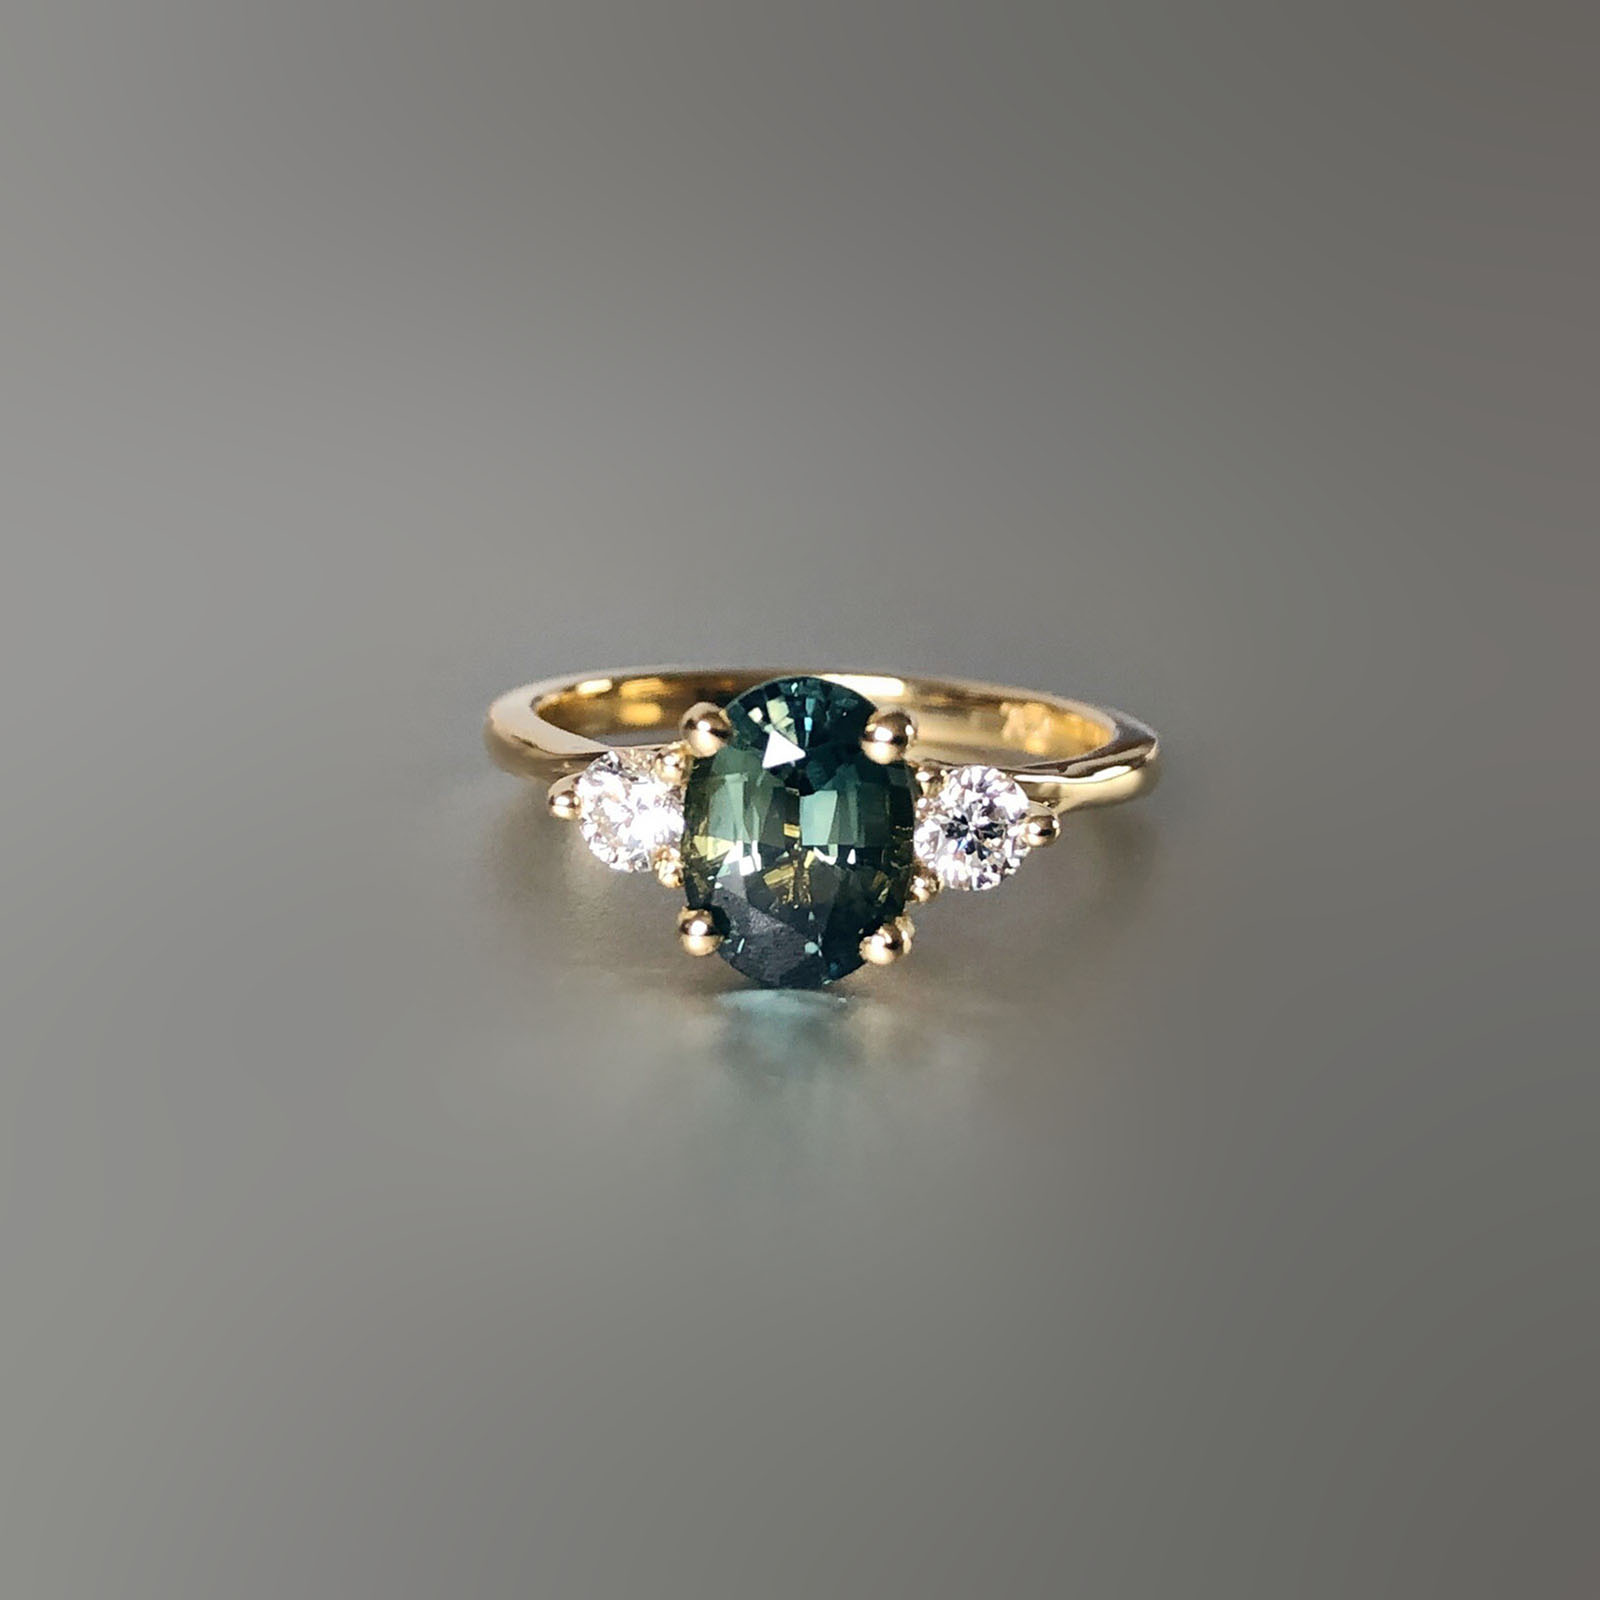 Australian sapphire ring with diamond side stones in yellow gold